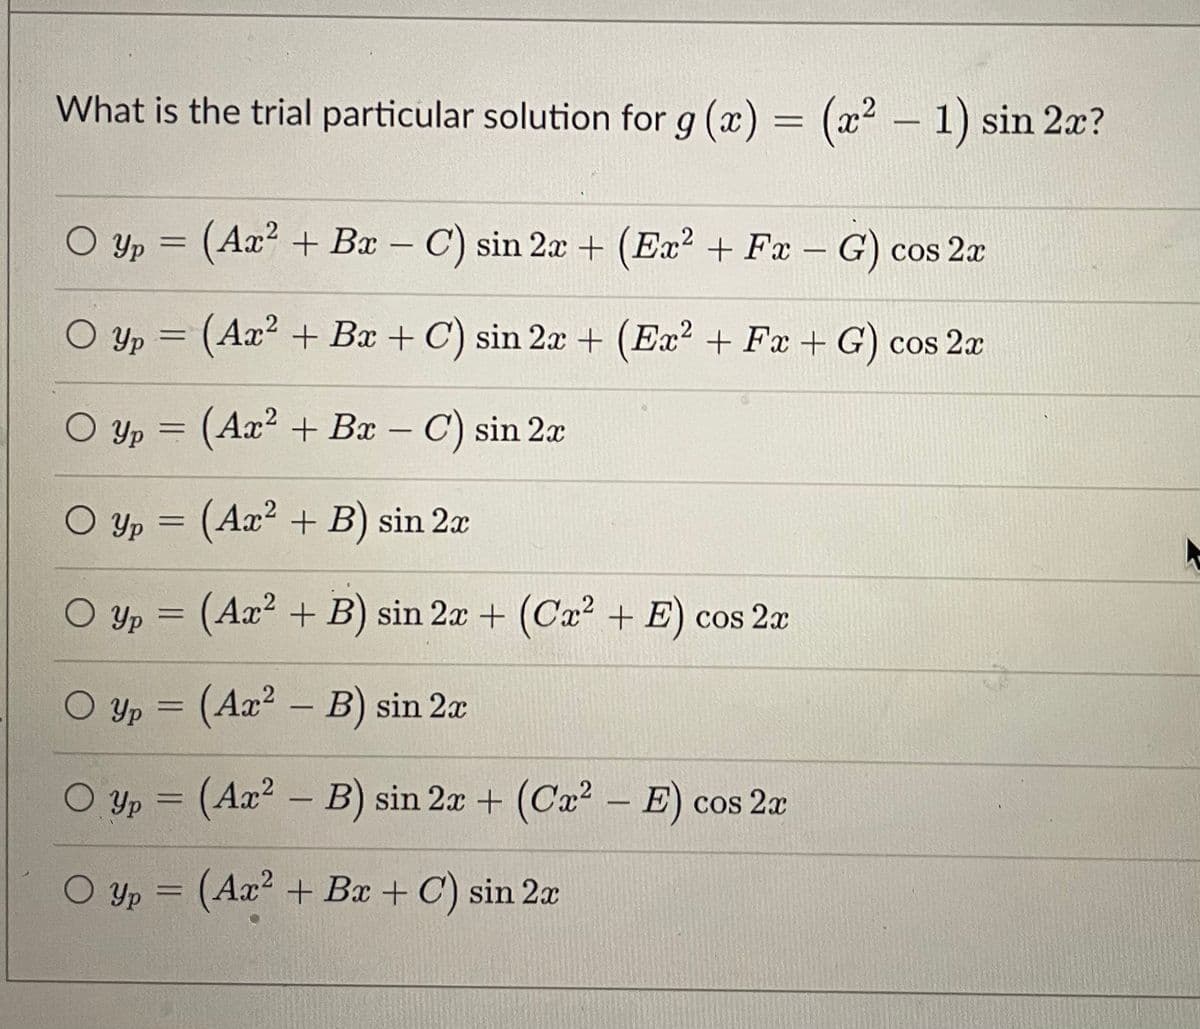 What is the trial particular solution for g (x) = (x2 – 1) sin 2x?
Yp = (Ax² + Bx – C) sin 2x + (Ex? + Fx - G) cos 2a
O yp = (Ax² + Bx + C) sin 2x + (Ex? + Fx + G) cos 2x
O Yp = (Ax² + Bx – C) sin 2x
O Yp = (Ax² + B) sin 2x
O Yp = (Ax² + B) sin 2x + (Ca² + E) cos 2x
O Yp = (Ax² – B) sin 2a
%3D
O Yp = (Ax² – B) sin 2x + (Ca2 – E) cos 2a
%3D
-
O yp = (Ax² + Bx + C) sin 2x
